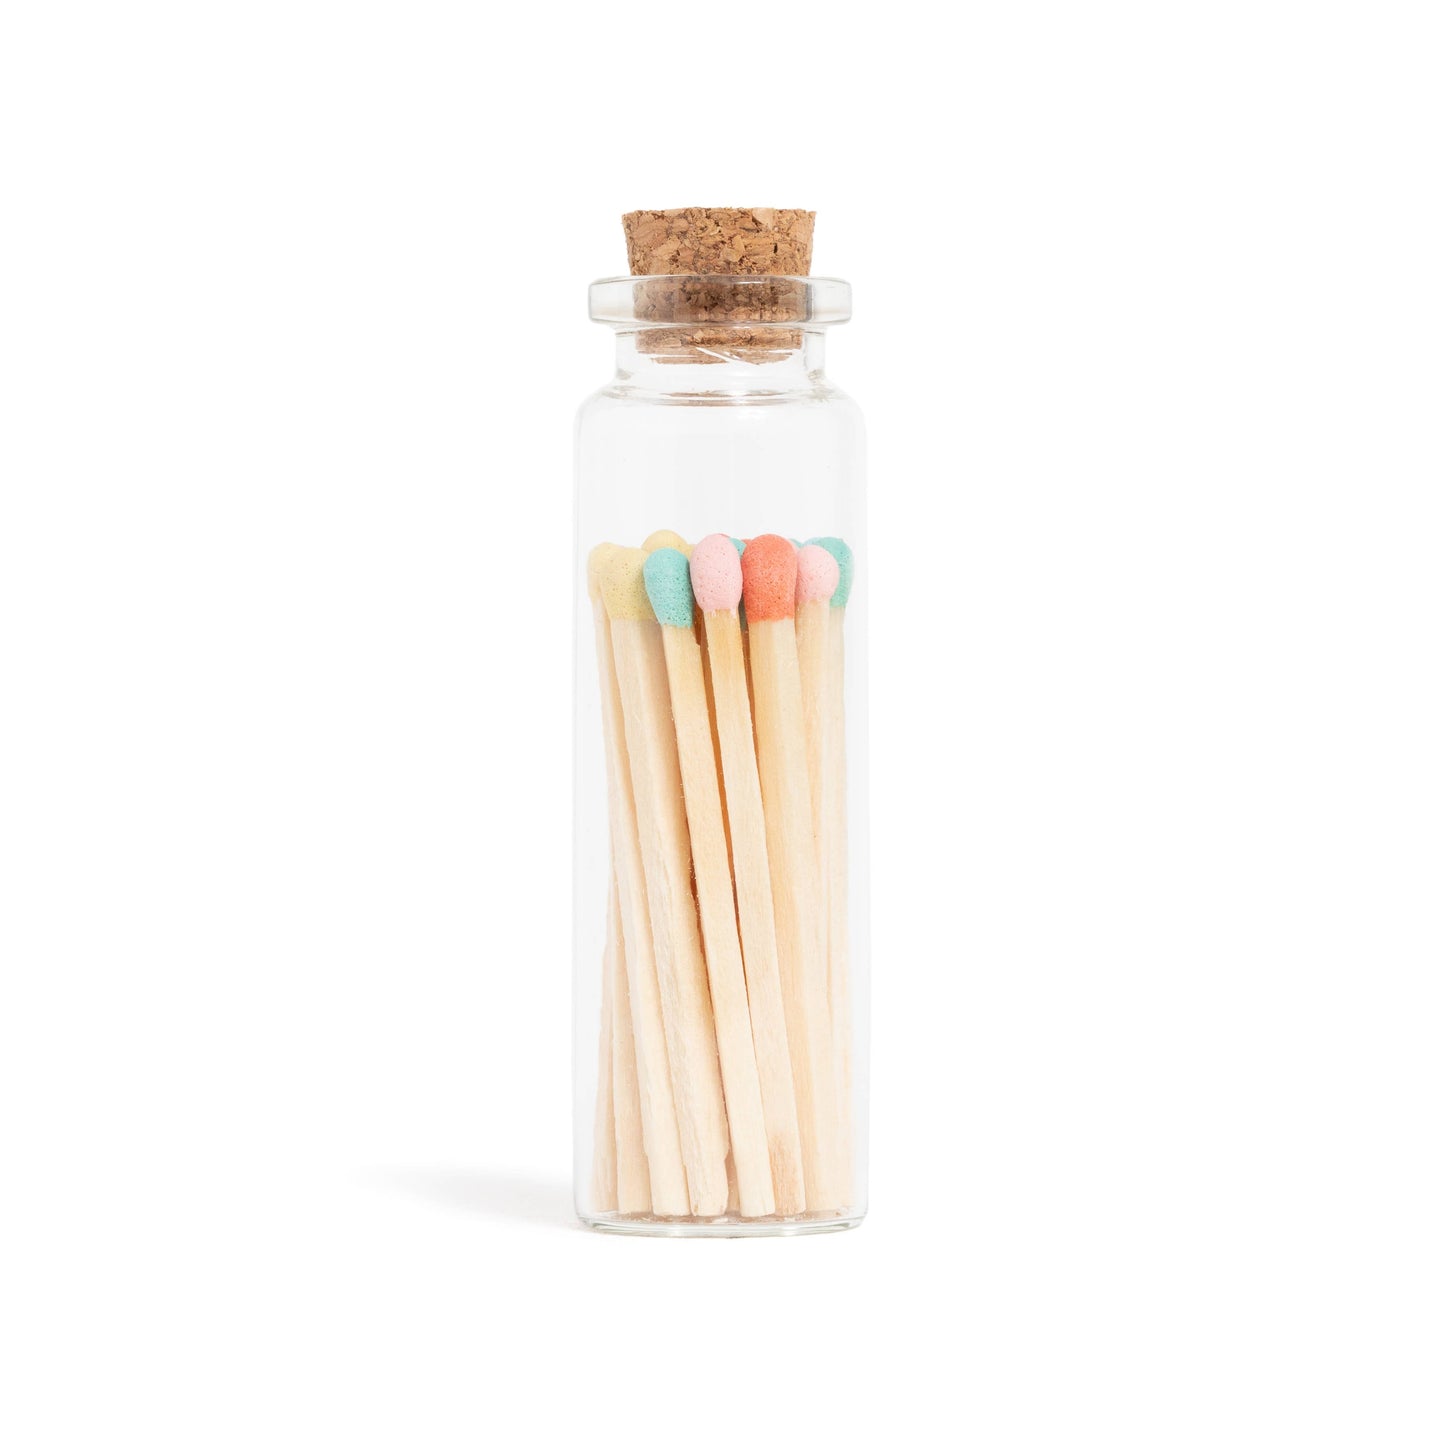 Enlighten the Occasion - Pastel Mix Matches in Small Corked Vial